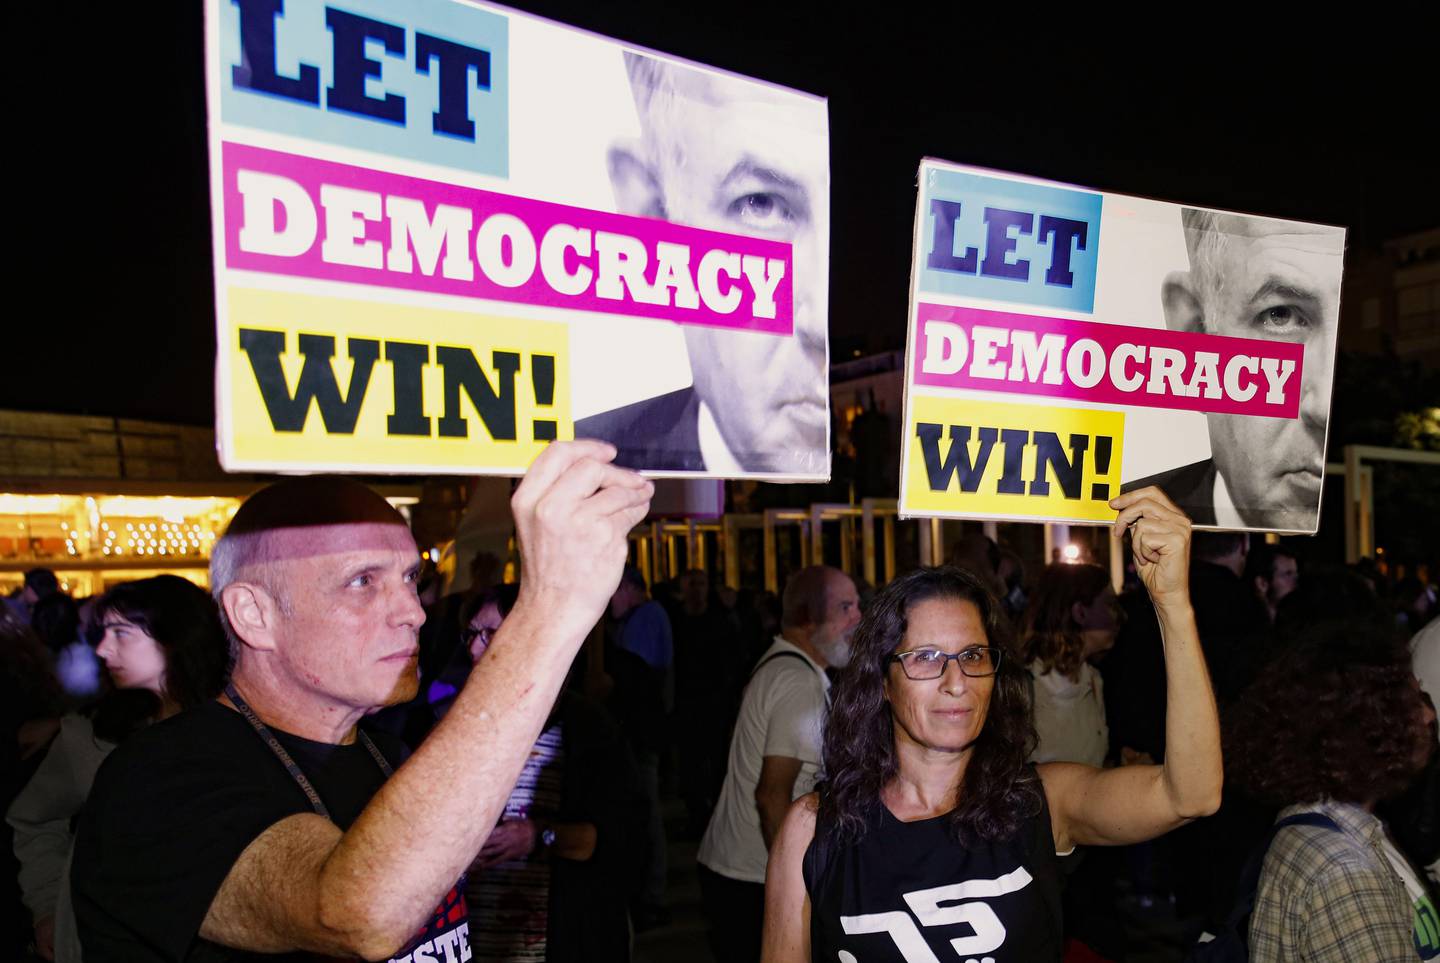 Israeli opposition supporters hold placards as they take part in a rally against Prime Minister Benjamin Netanyahu in the coastal city of Tel Aviv on November 23, 2019. - Netanyahu's indictment on corruption charges prompted speculation that the end of his decade-long tenure was nigh, though several key allies expressed support for the beleaguered Israeli premier.
The Israeli Parliament now has less than three weeks to find a candidate who can gain the support of more than half of the 120 lawmakers, or a deeply unpopular third election will be called. (Photo by JACK GUEZ / AFP)